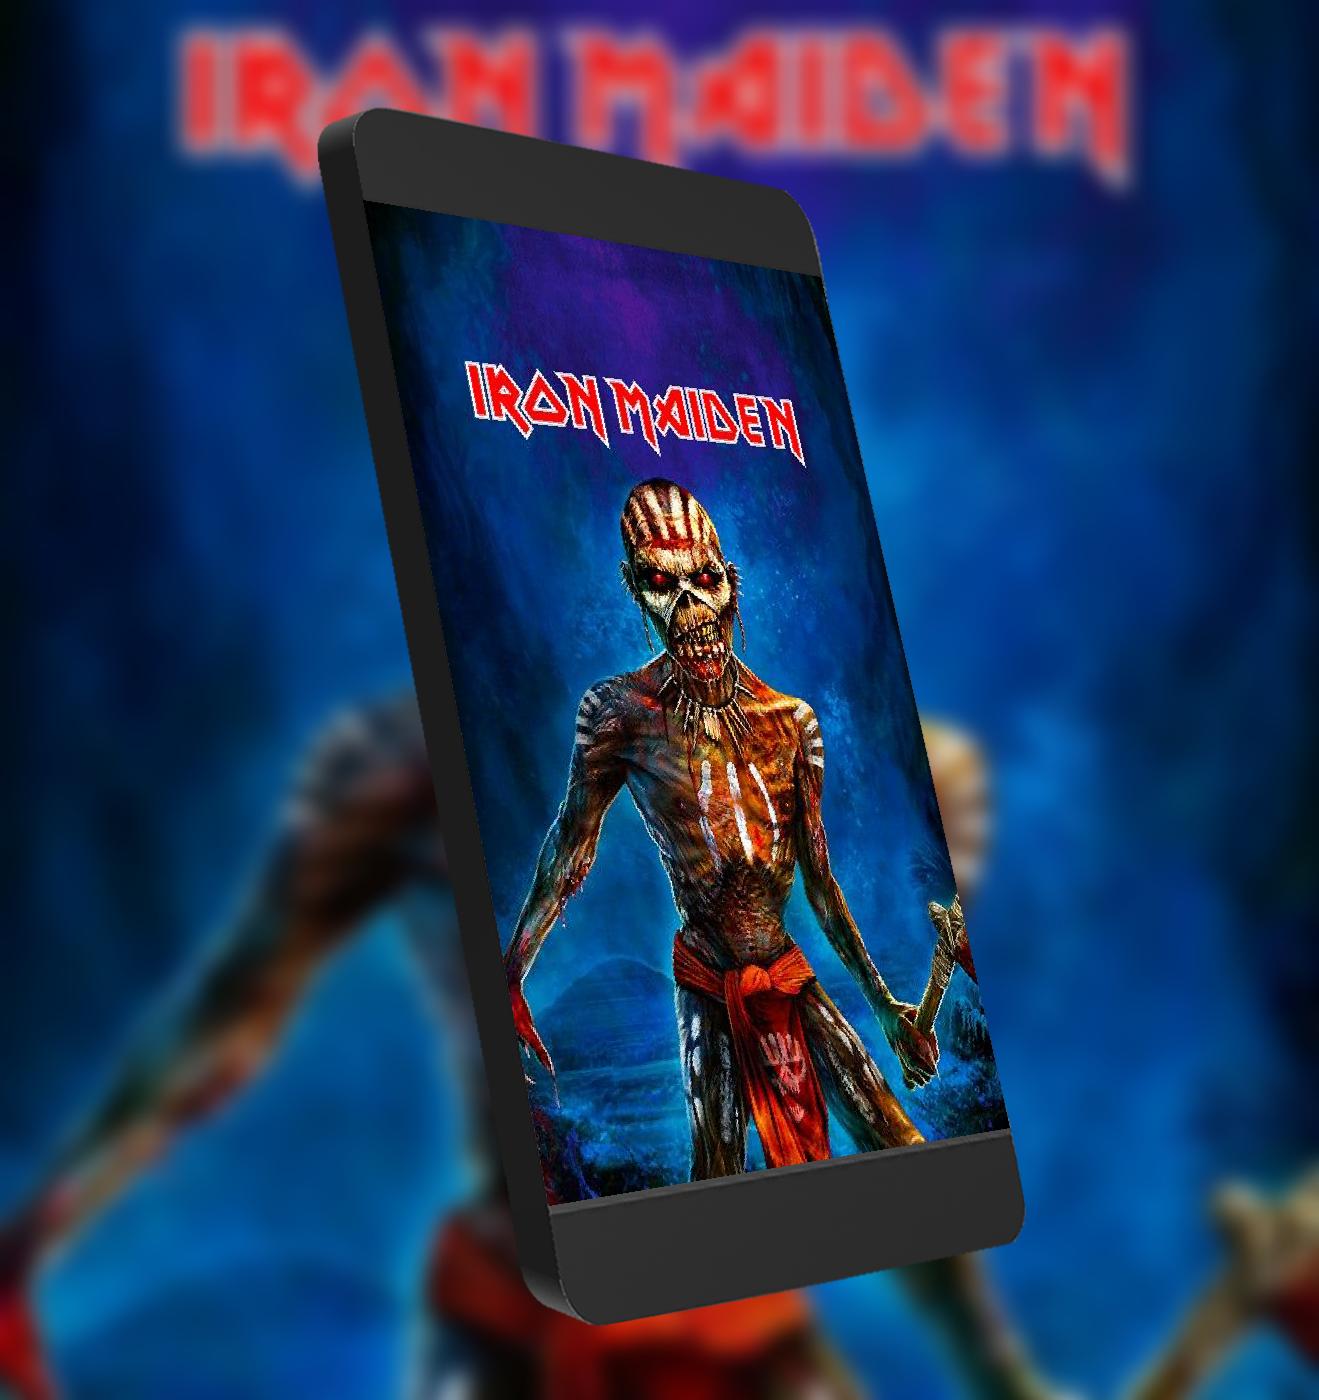 Iron Maiden Wallpaper for Android